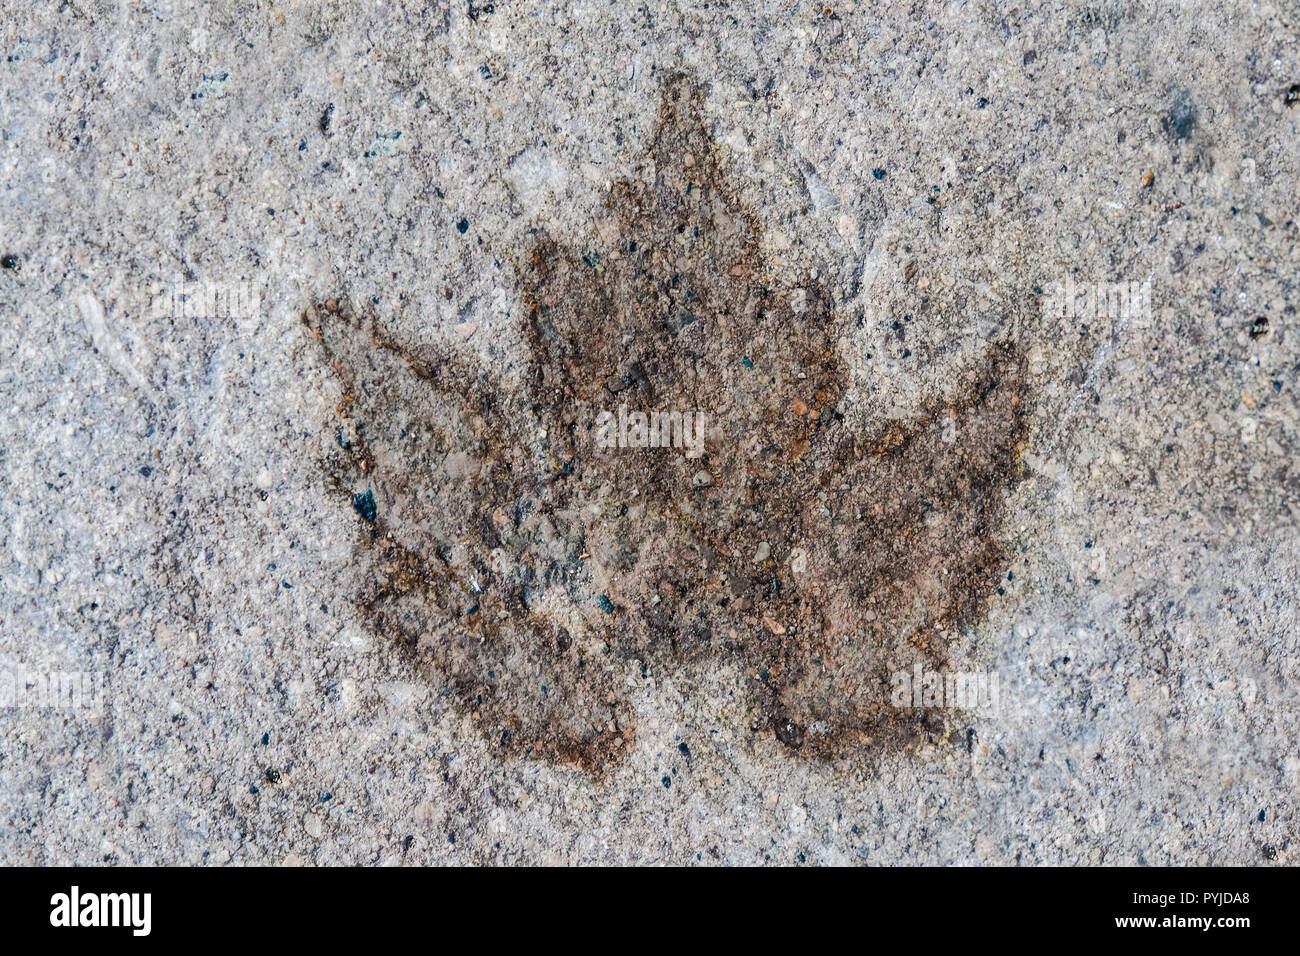 The footprint of a maple leaf on the sidewalk. Stock Photo